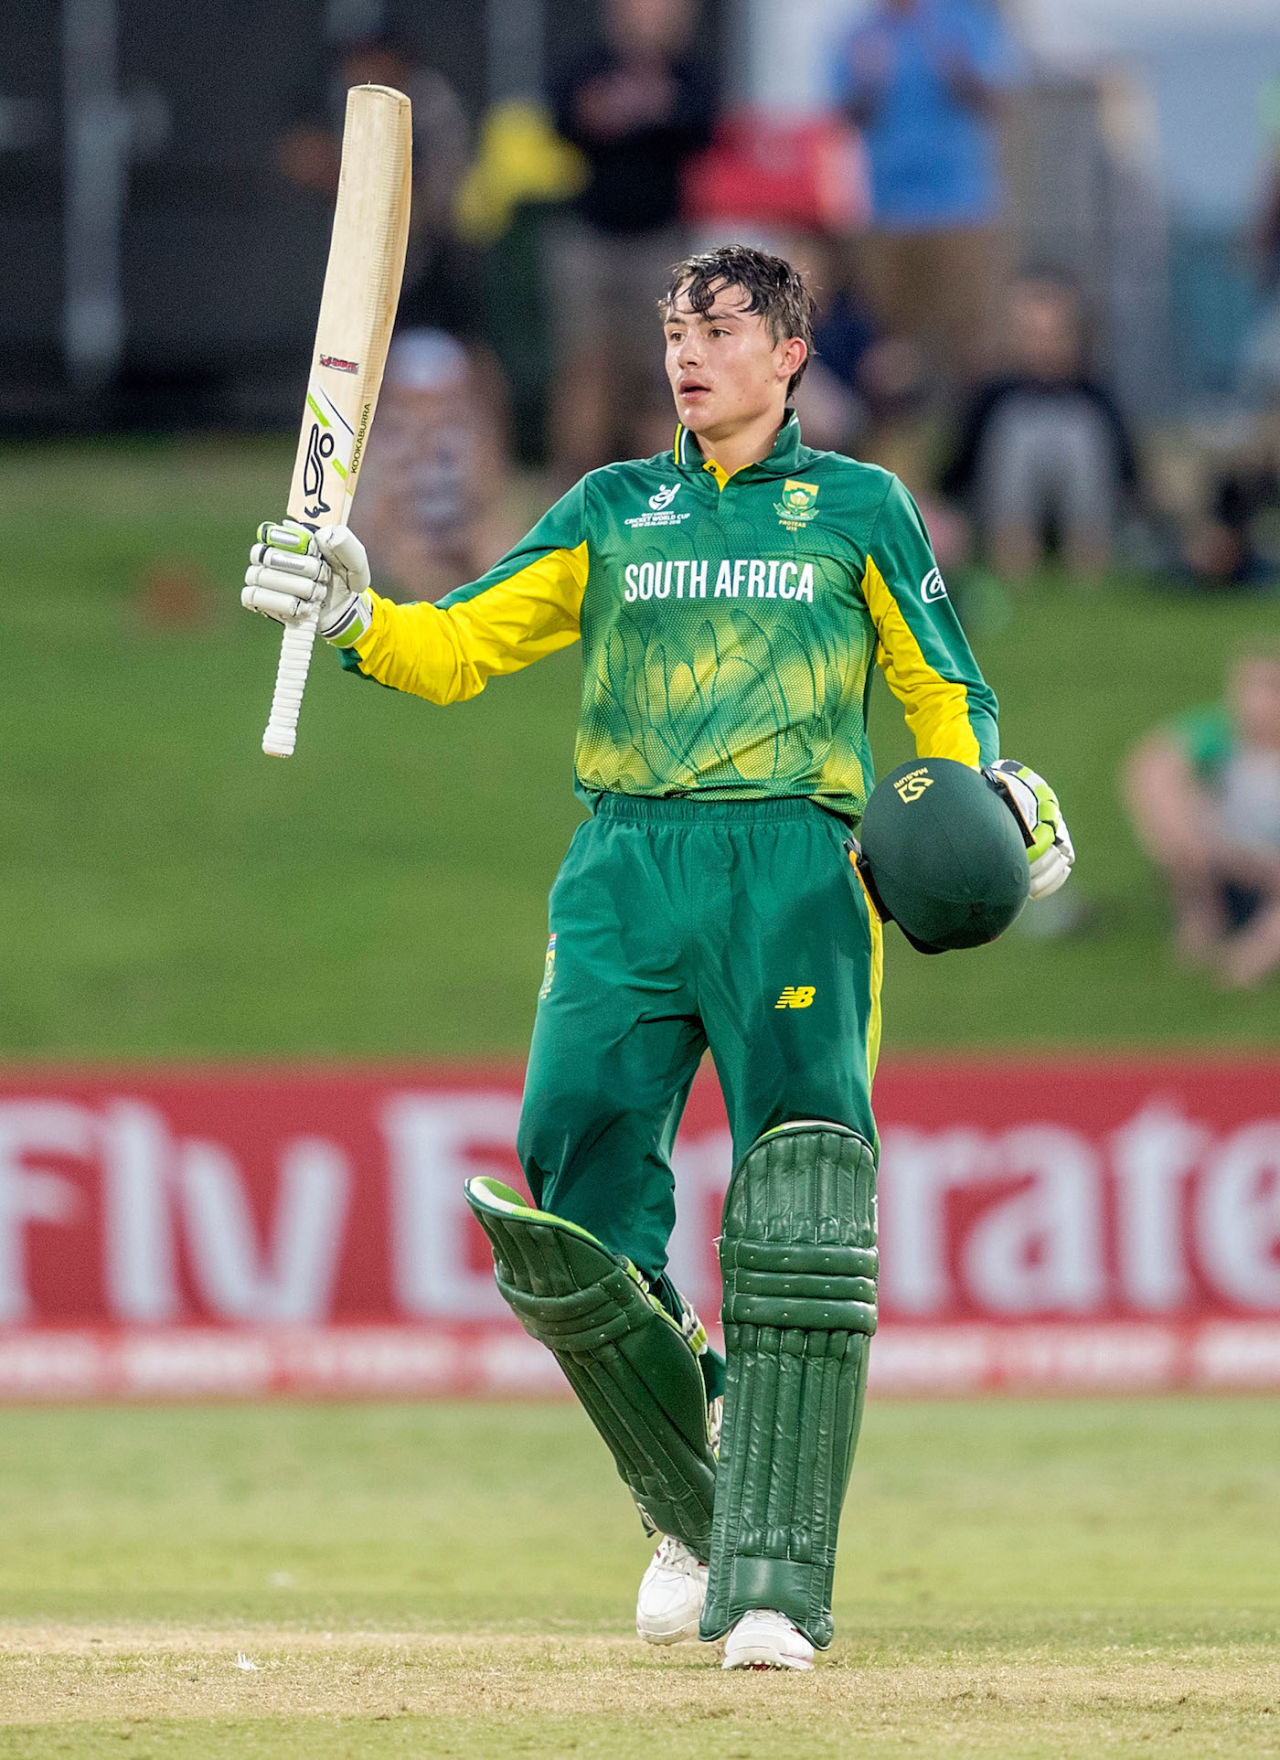 Hermann Rolfes celebrates his century, New Zealand v South Africa, Under-19 World Cup, Group A, Mount Maunganui, January 20, 2018